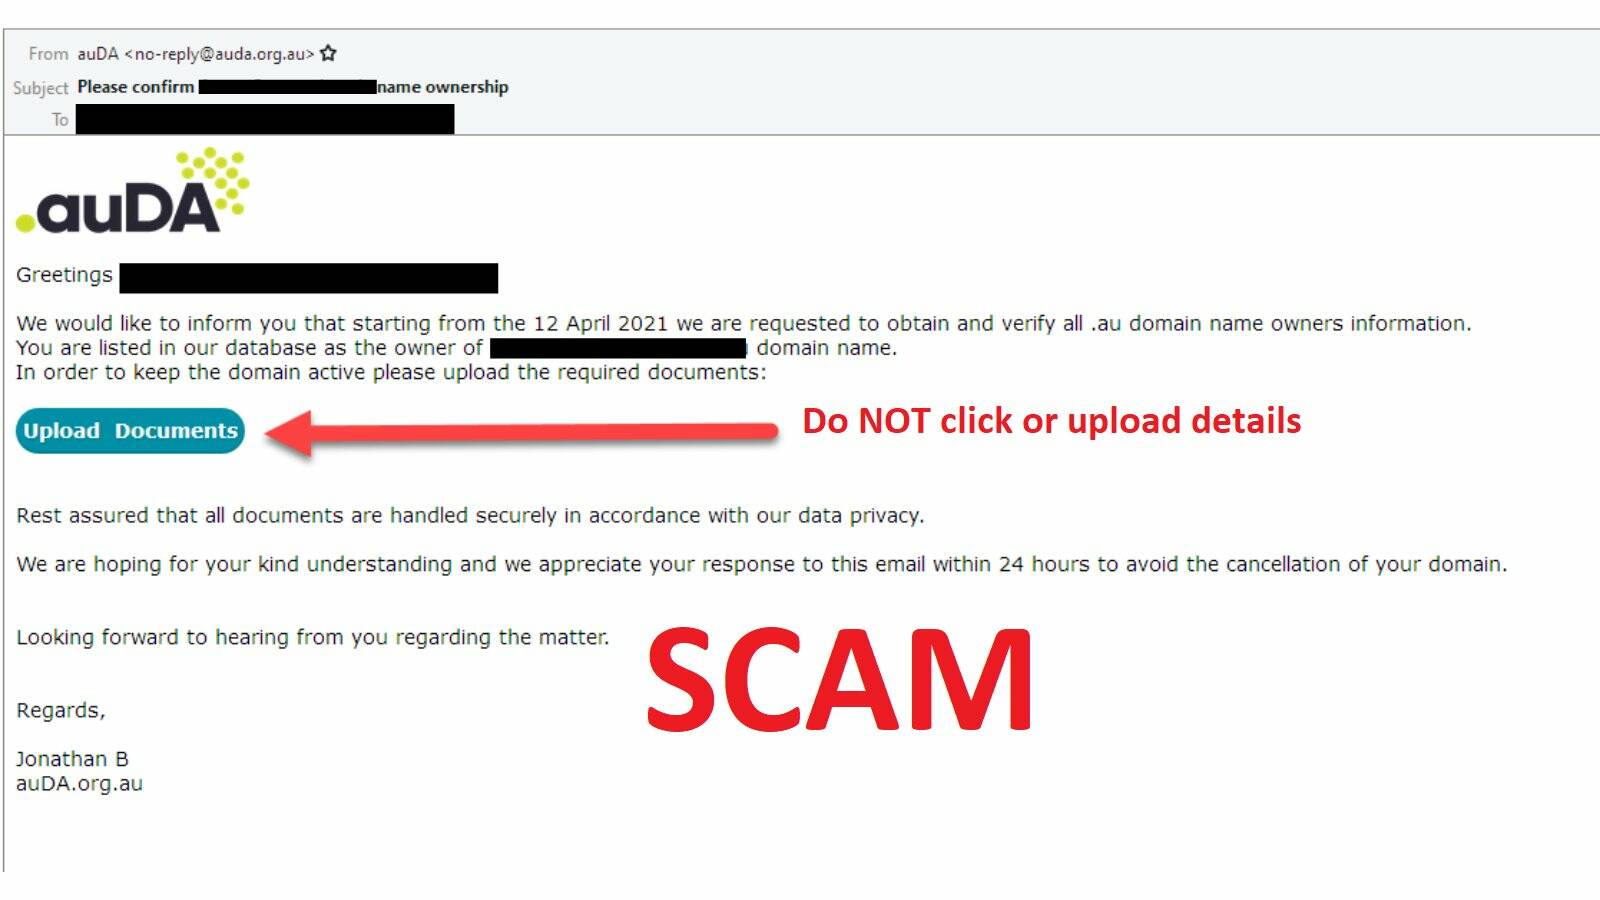 Woolworths gift card scam email reported to ACCC Scamwatch